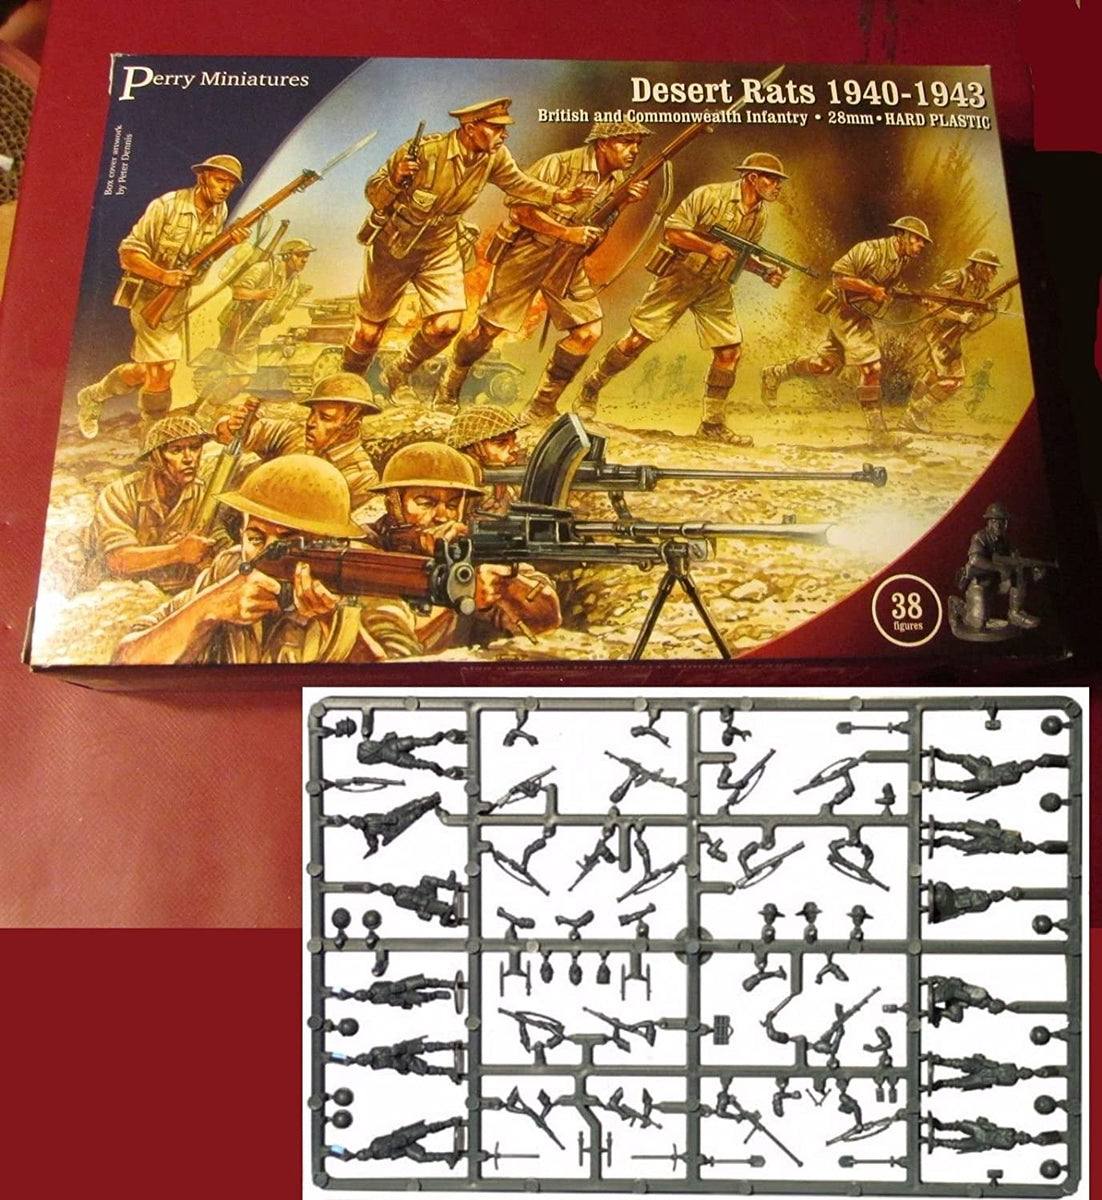 Perry Miniatures - British 8th Army Desert Rats 1940-1943